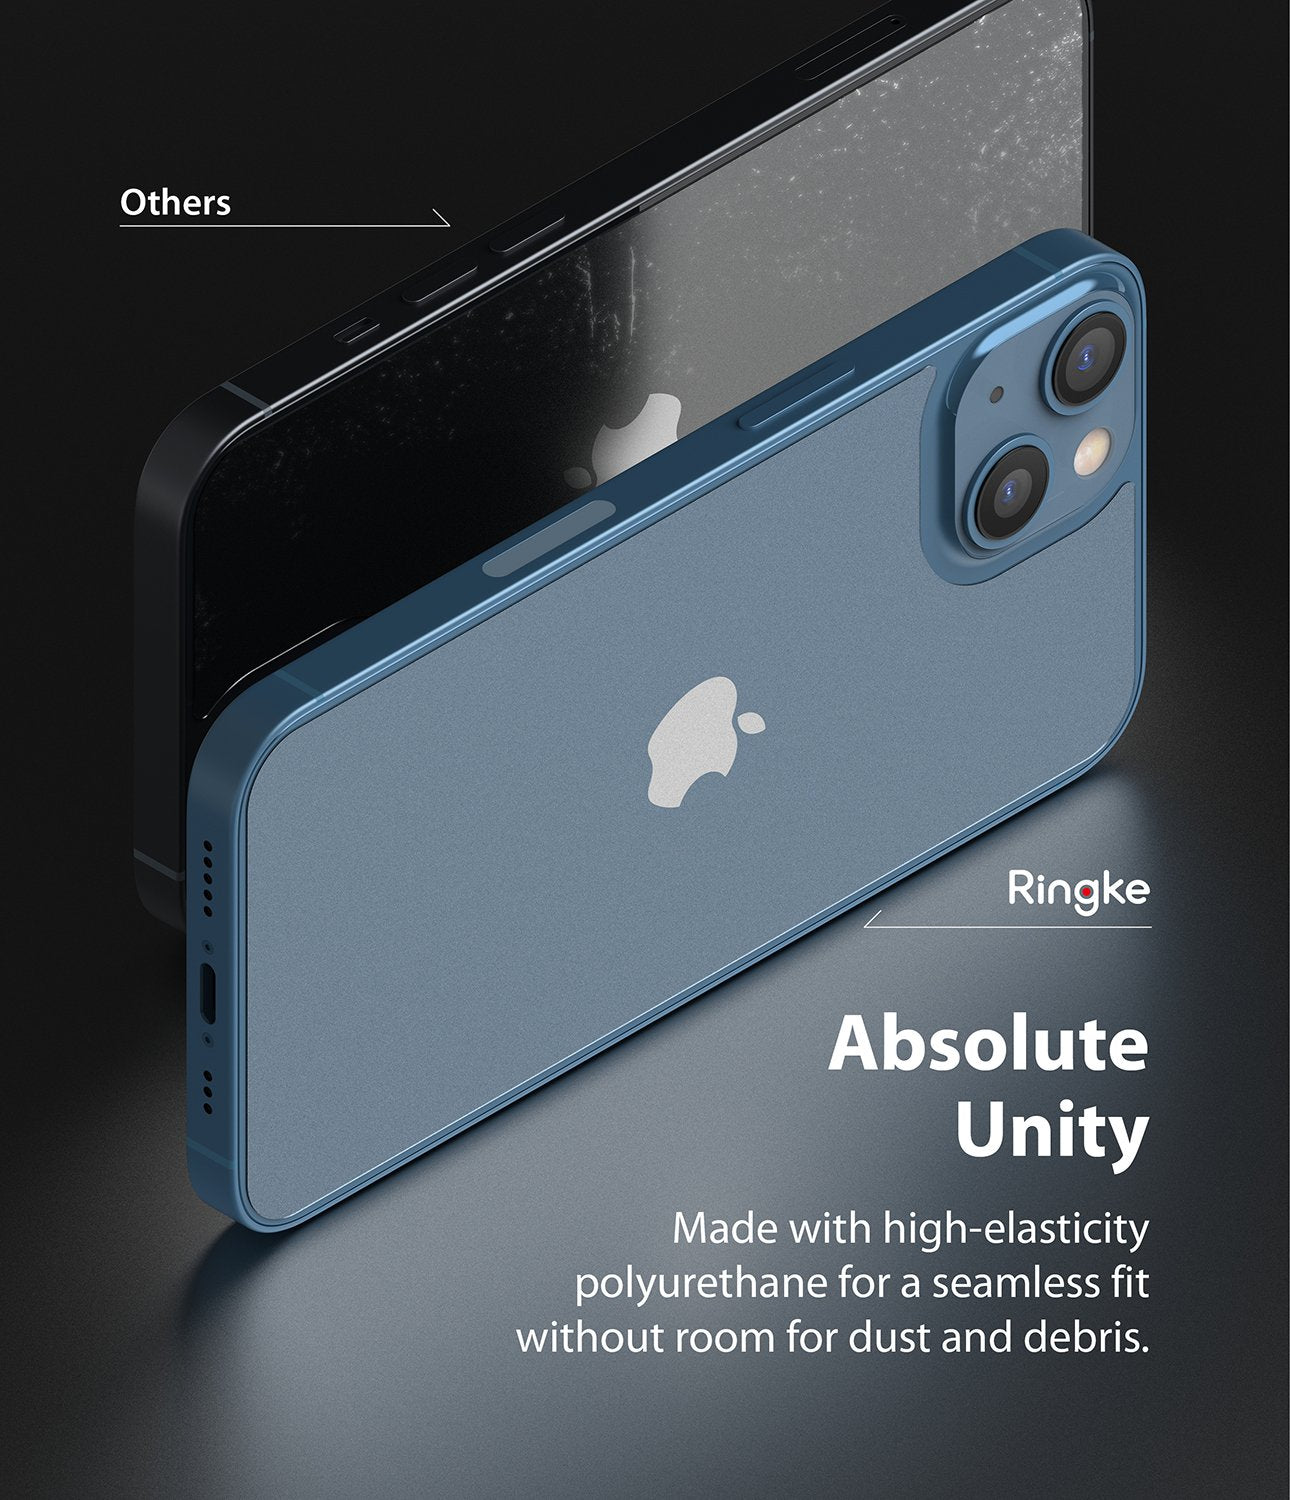 iPhone 13 Back Screen Protector | Invisible Defender - Absolute Unity. Made with high-elasticity polyurethane for a seamless fir without room for dust and debris.